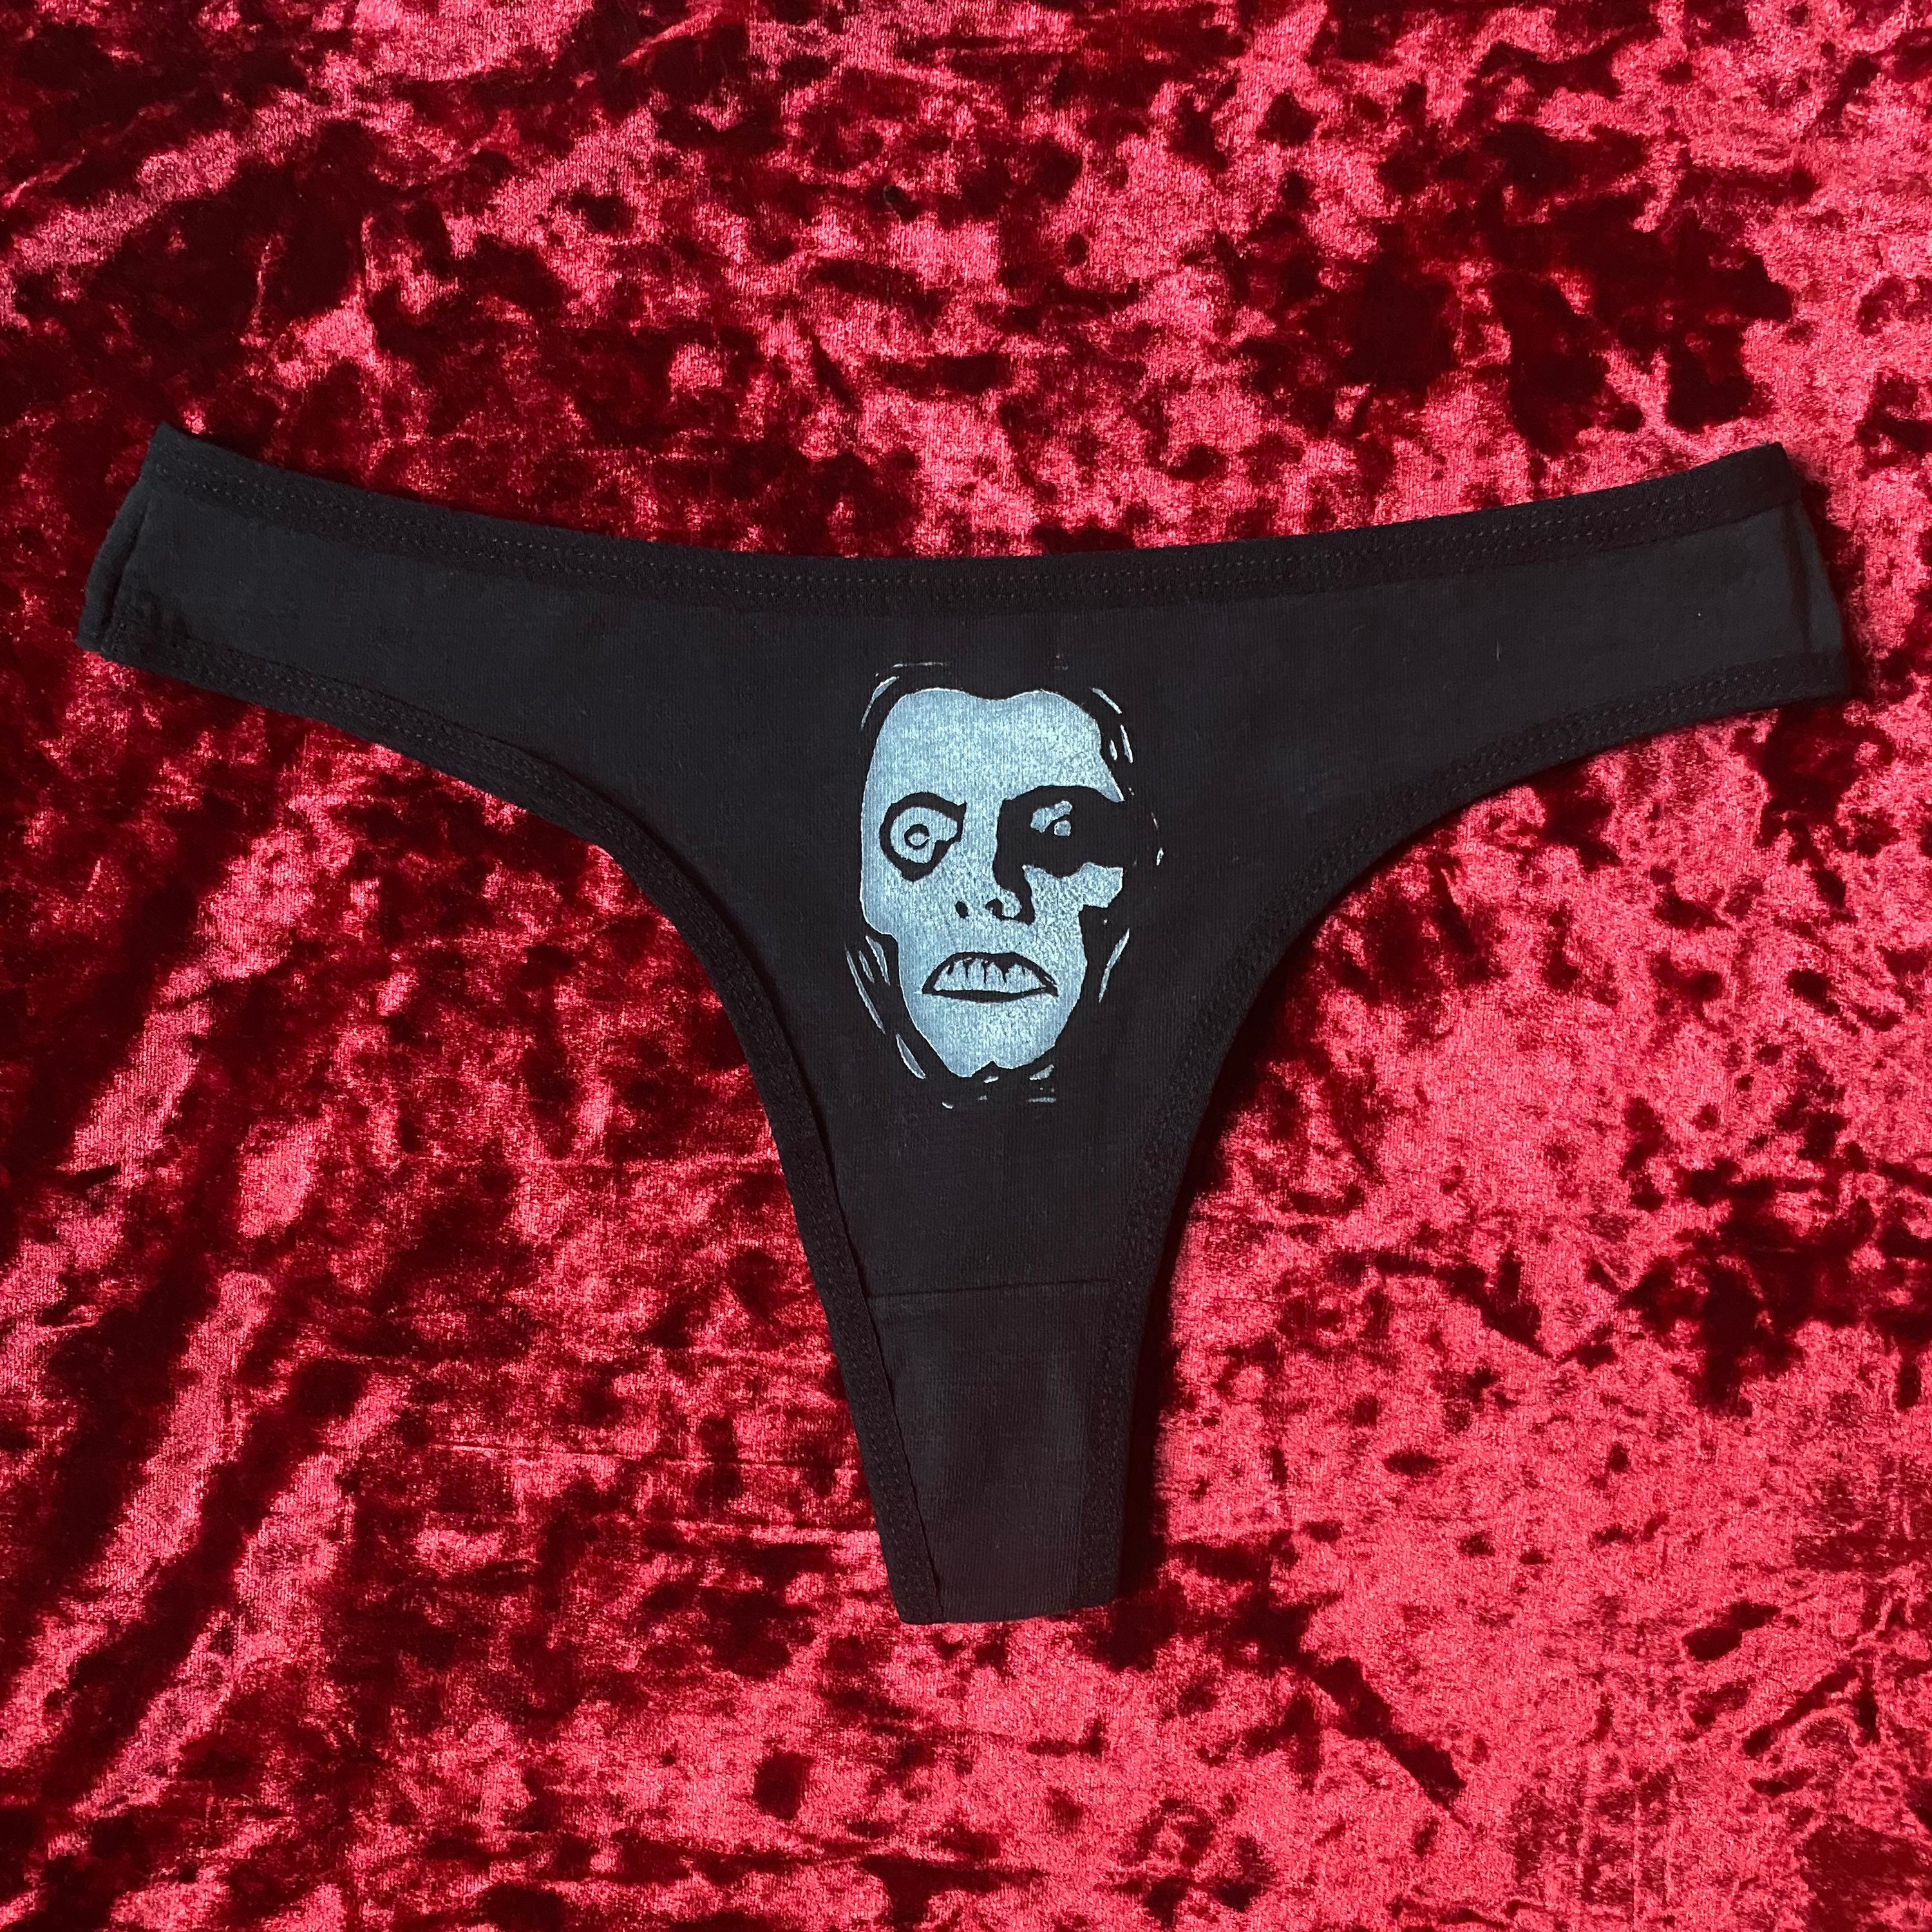 Gag Gift, Shartwear Pre-stained Underwear, Funny Gift for Friend, Poop  Stain Underpants, Fun Gift, White Elephant, Humor Gift, Shit Happens -   Canada